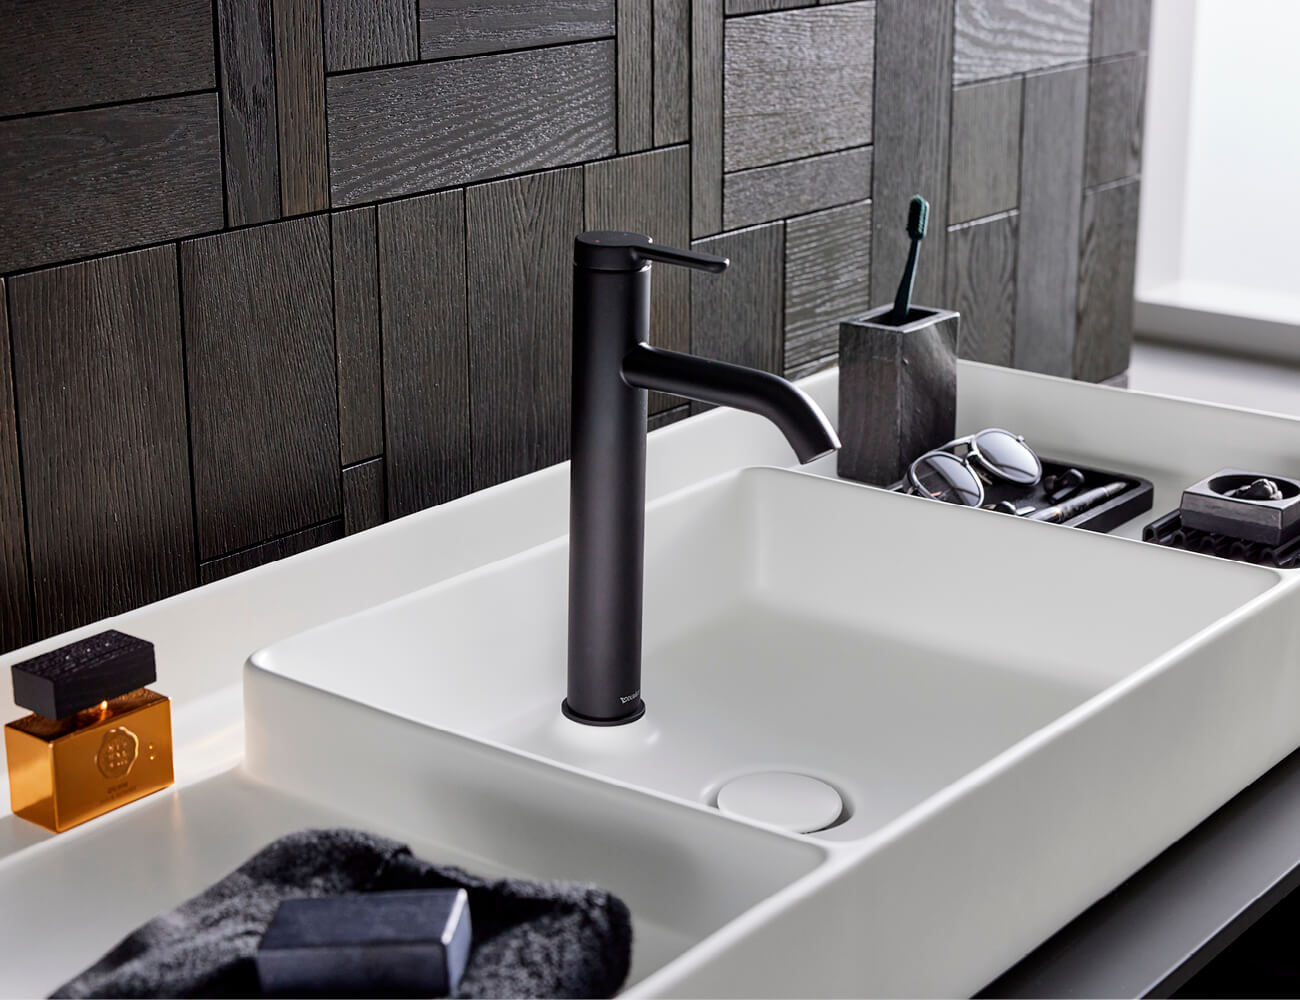 Bento Starck Box washbasin in combination with C.1 faucet in black
